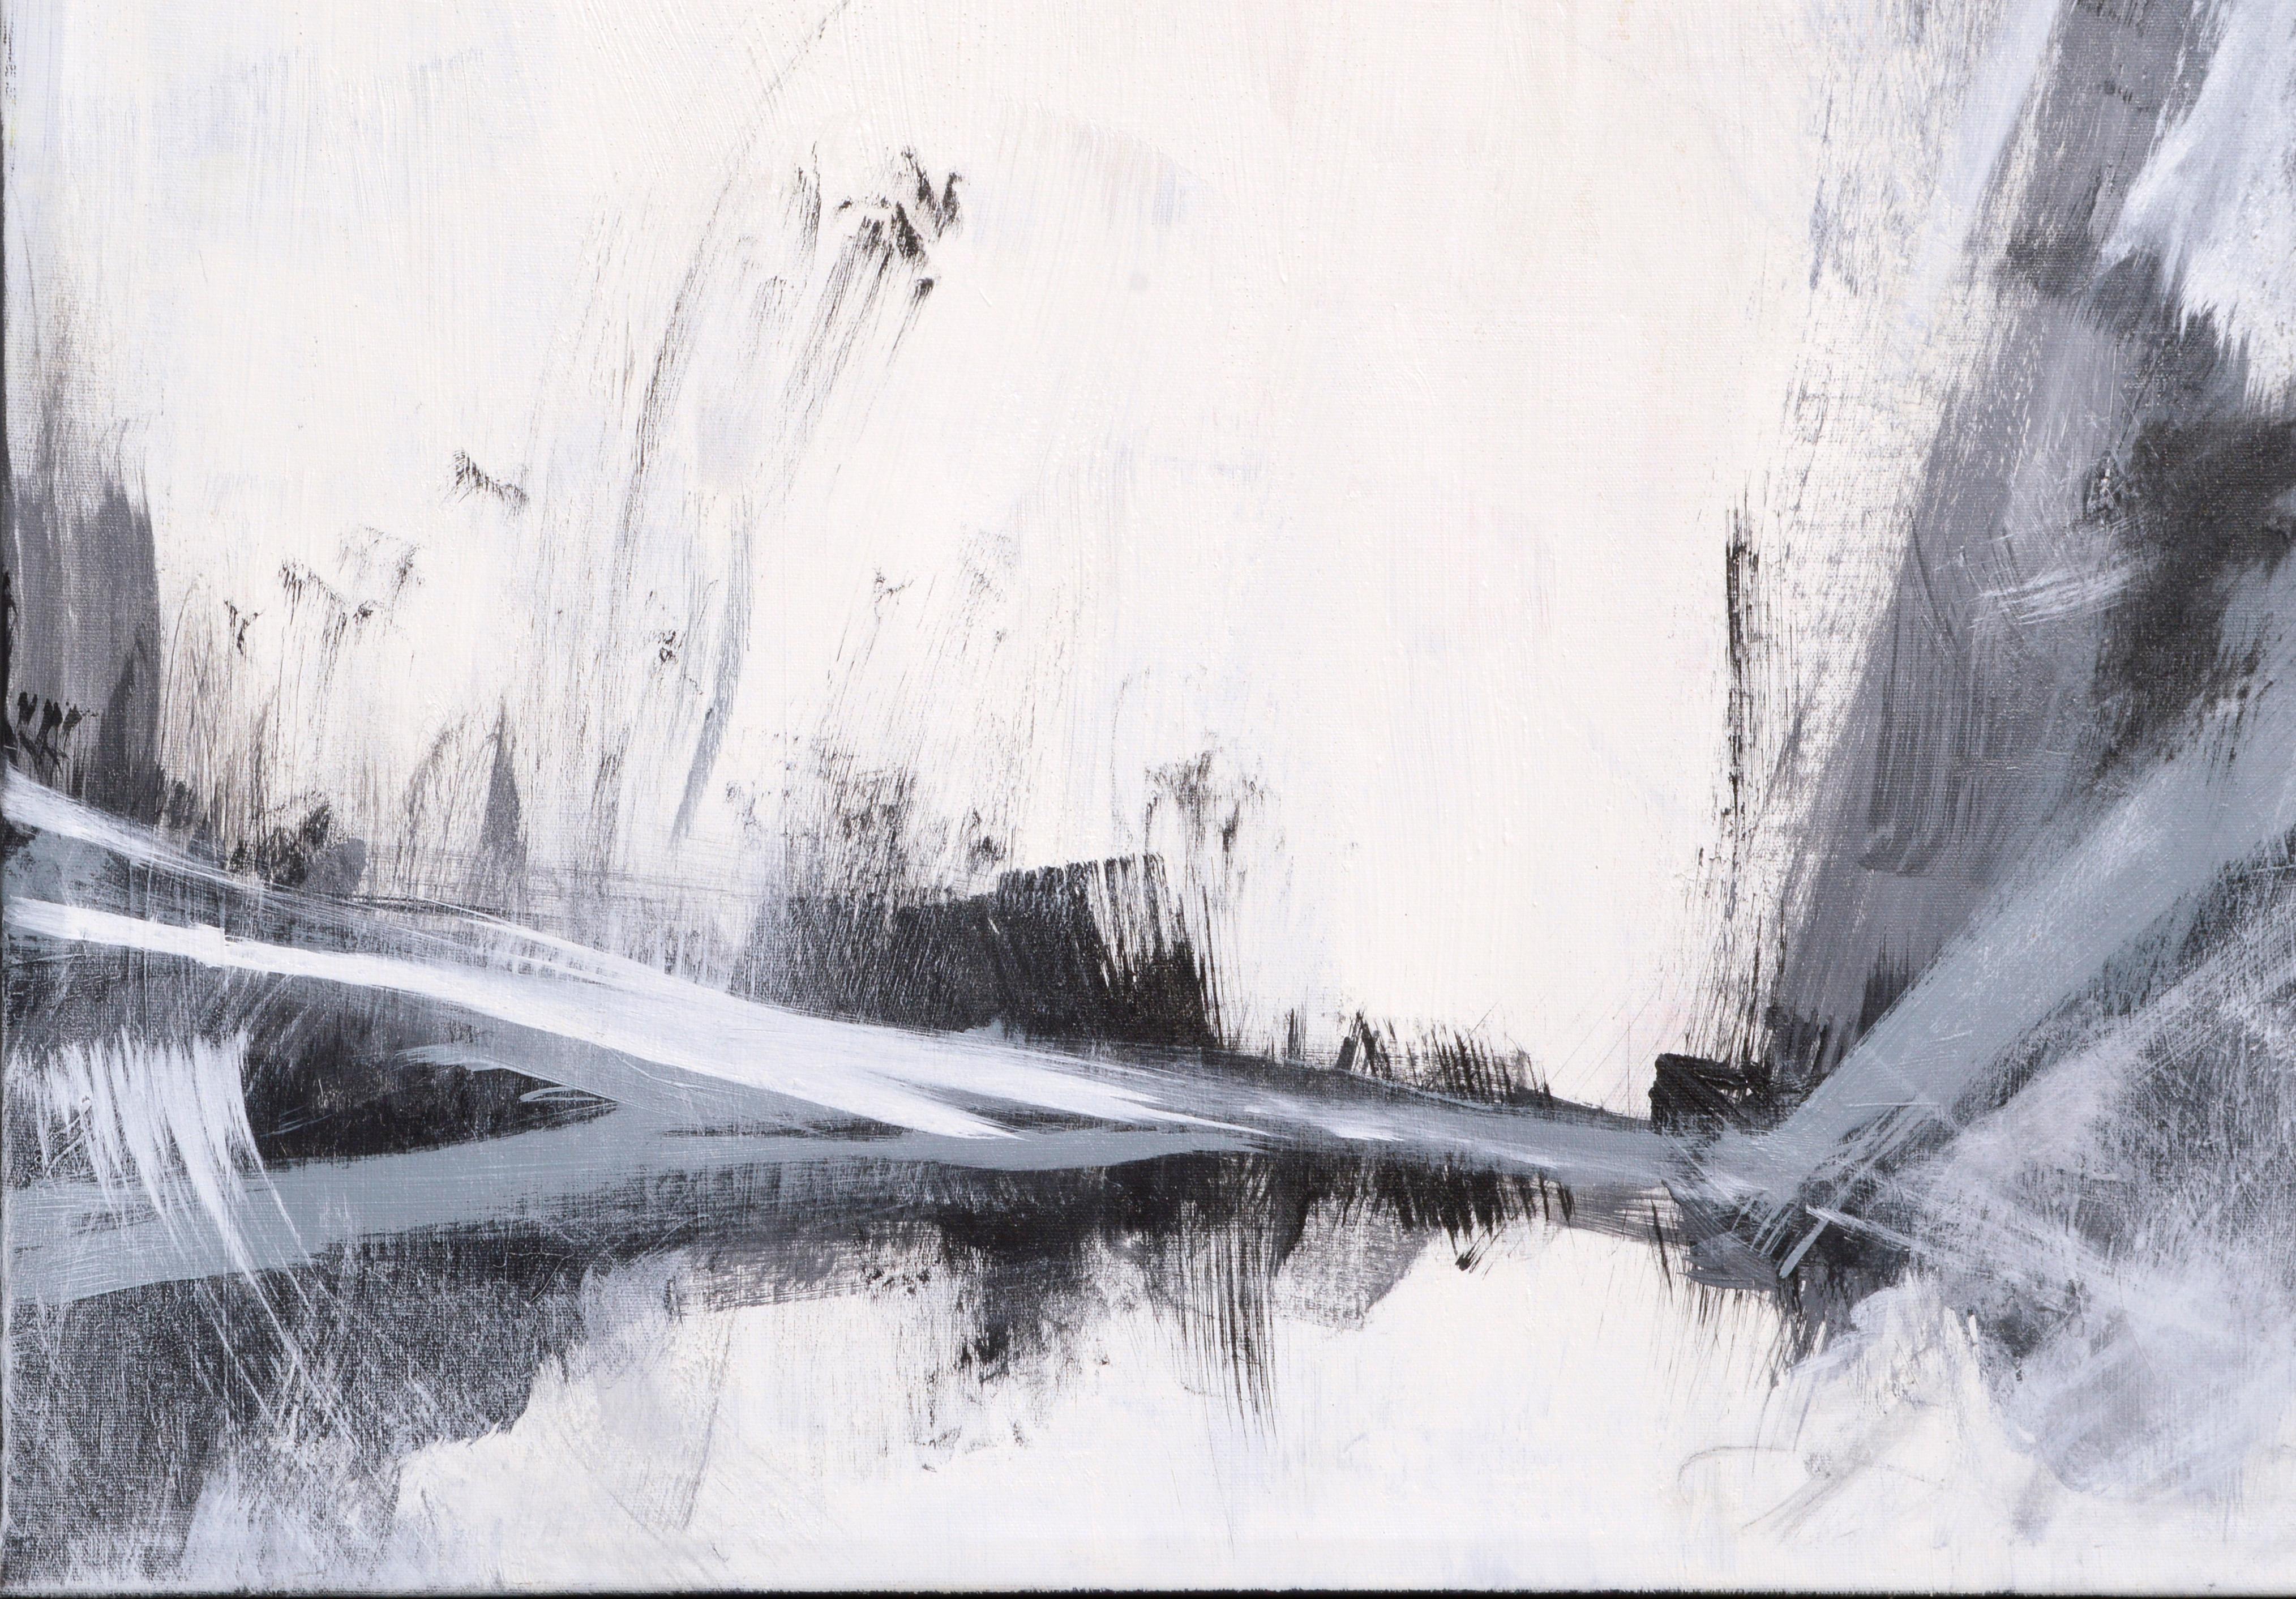 Abstract Black and White Landscape - Painting by Unknown